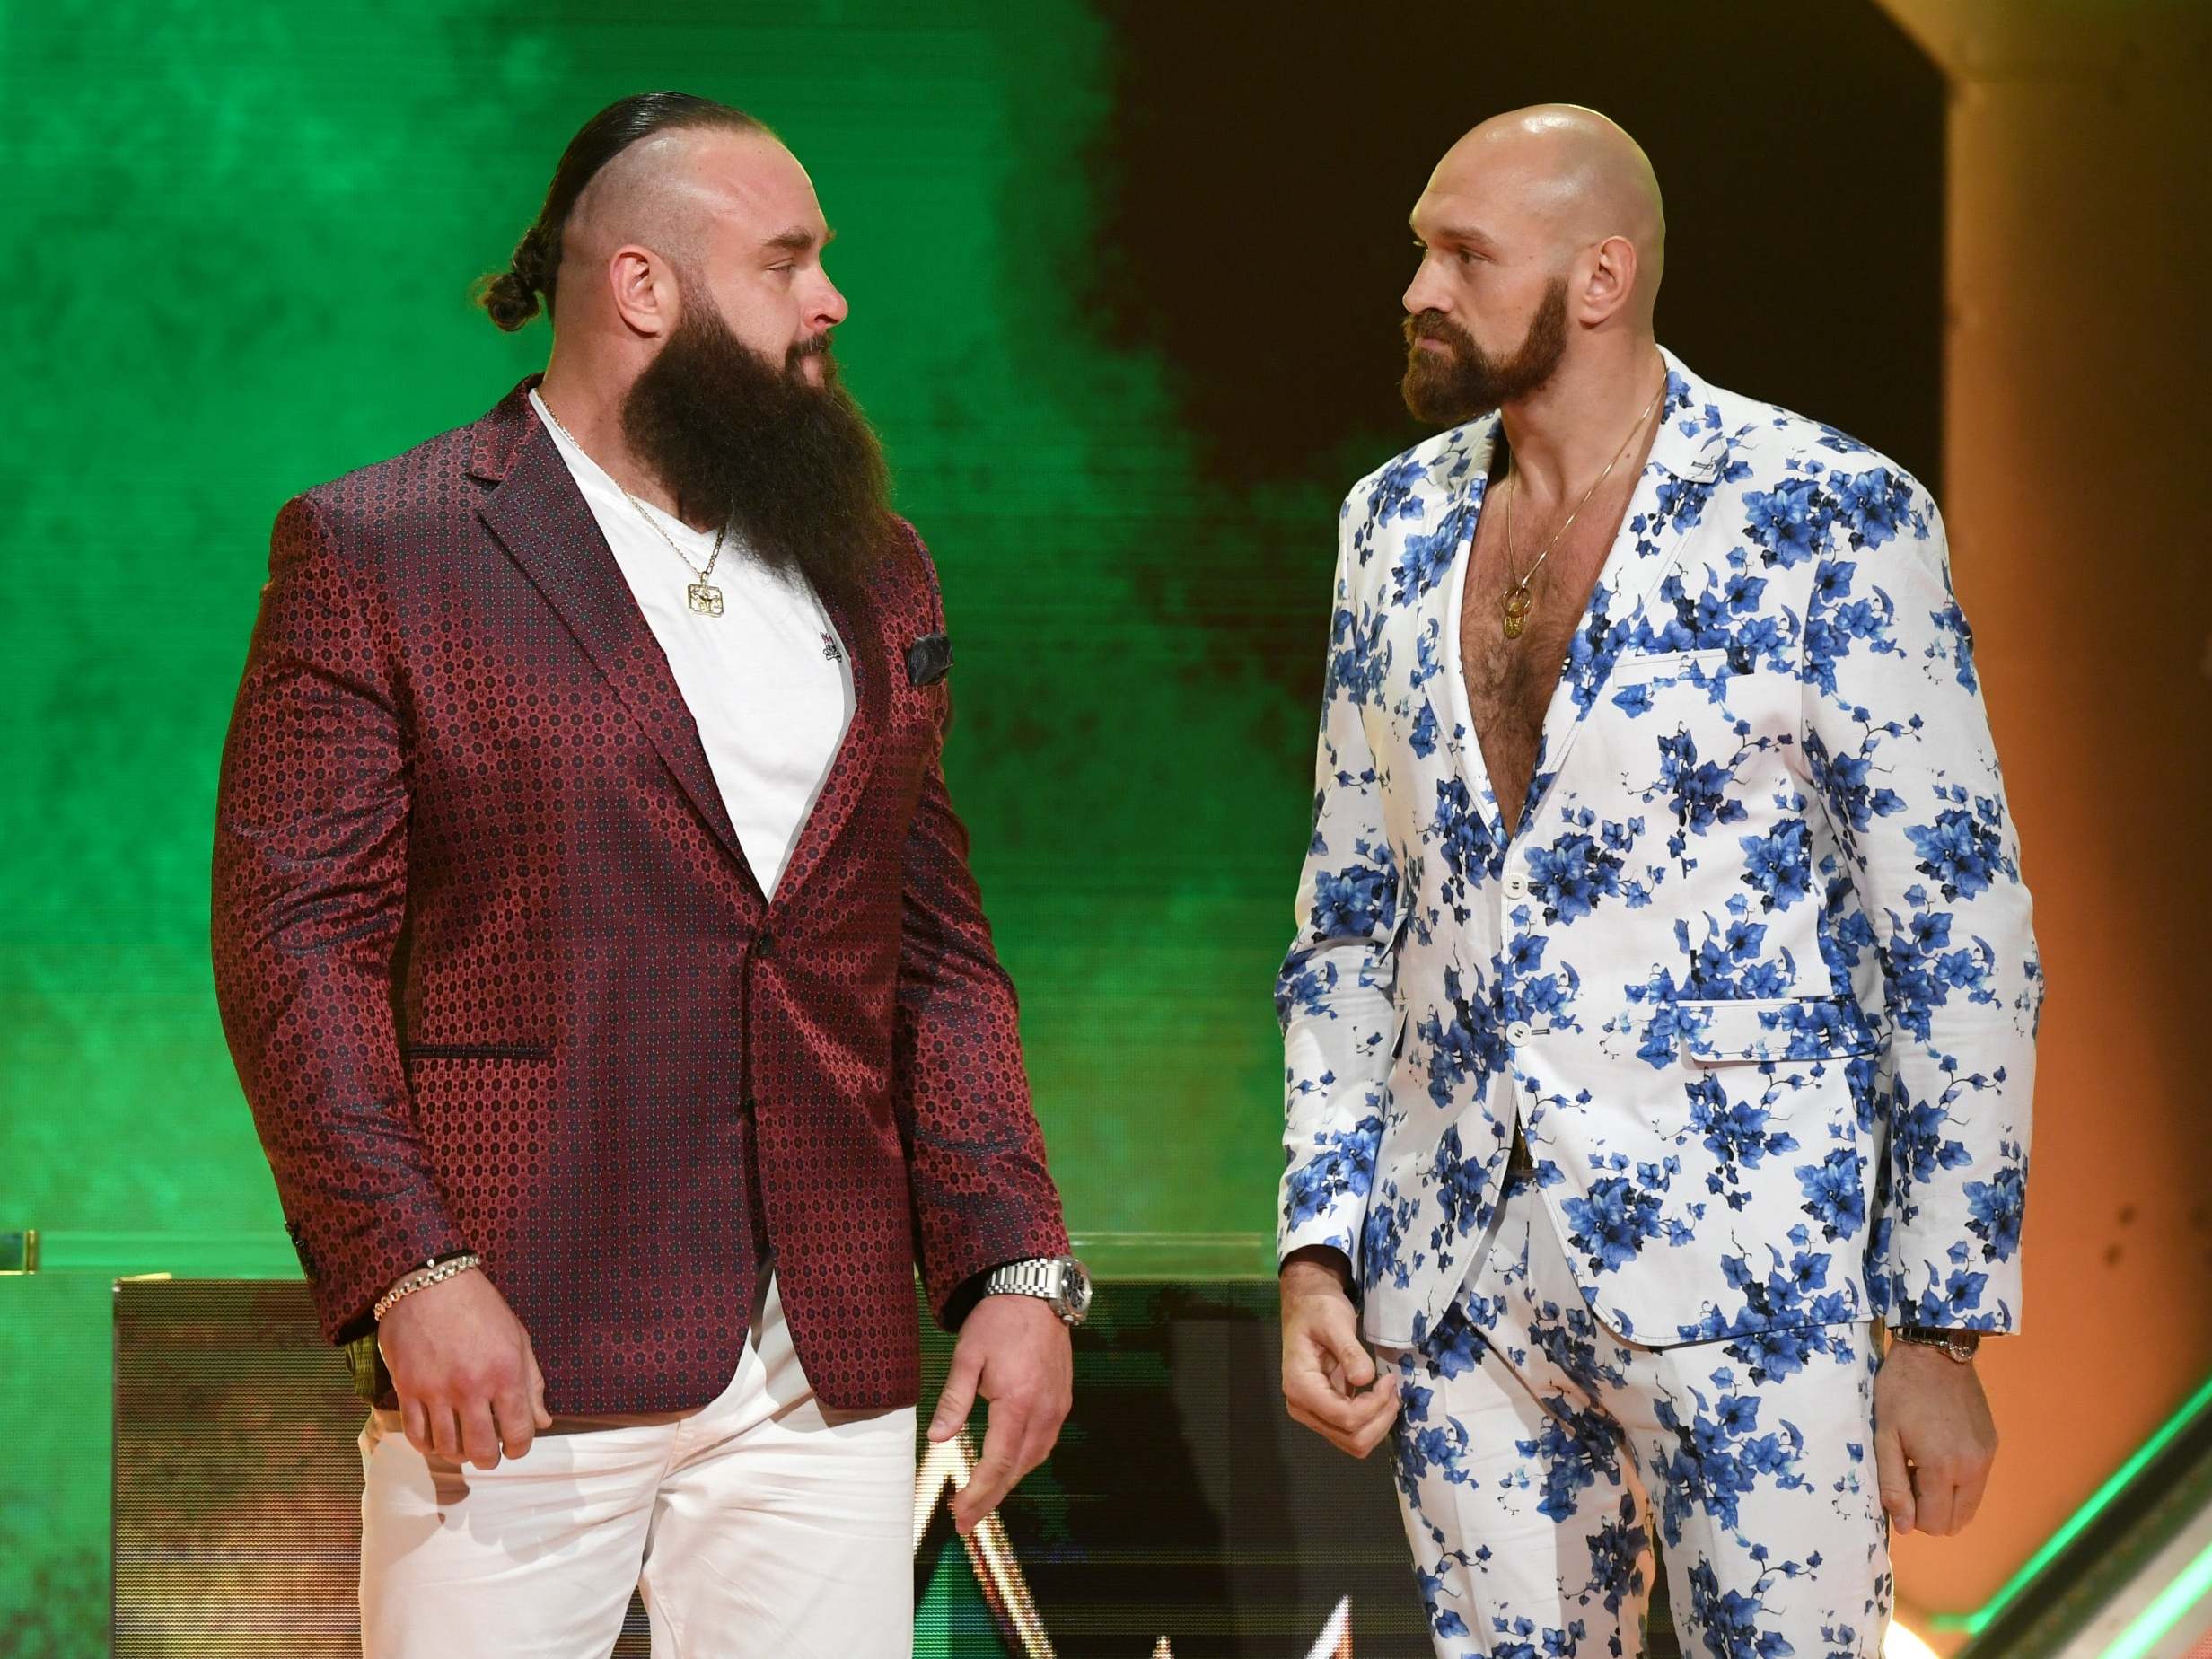 Tyson Fury on his WWE debut with Braun Strowman, fame, and why he will not fight Conor McGregor